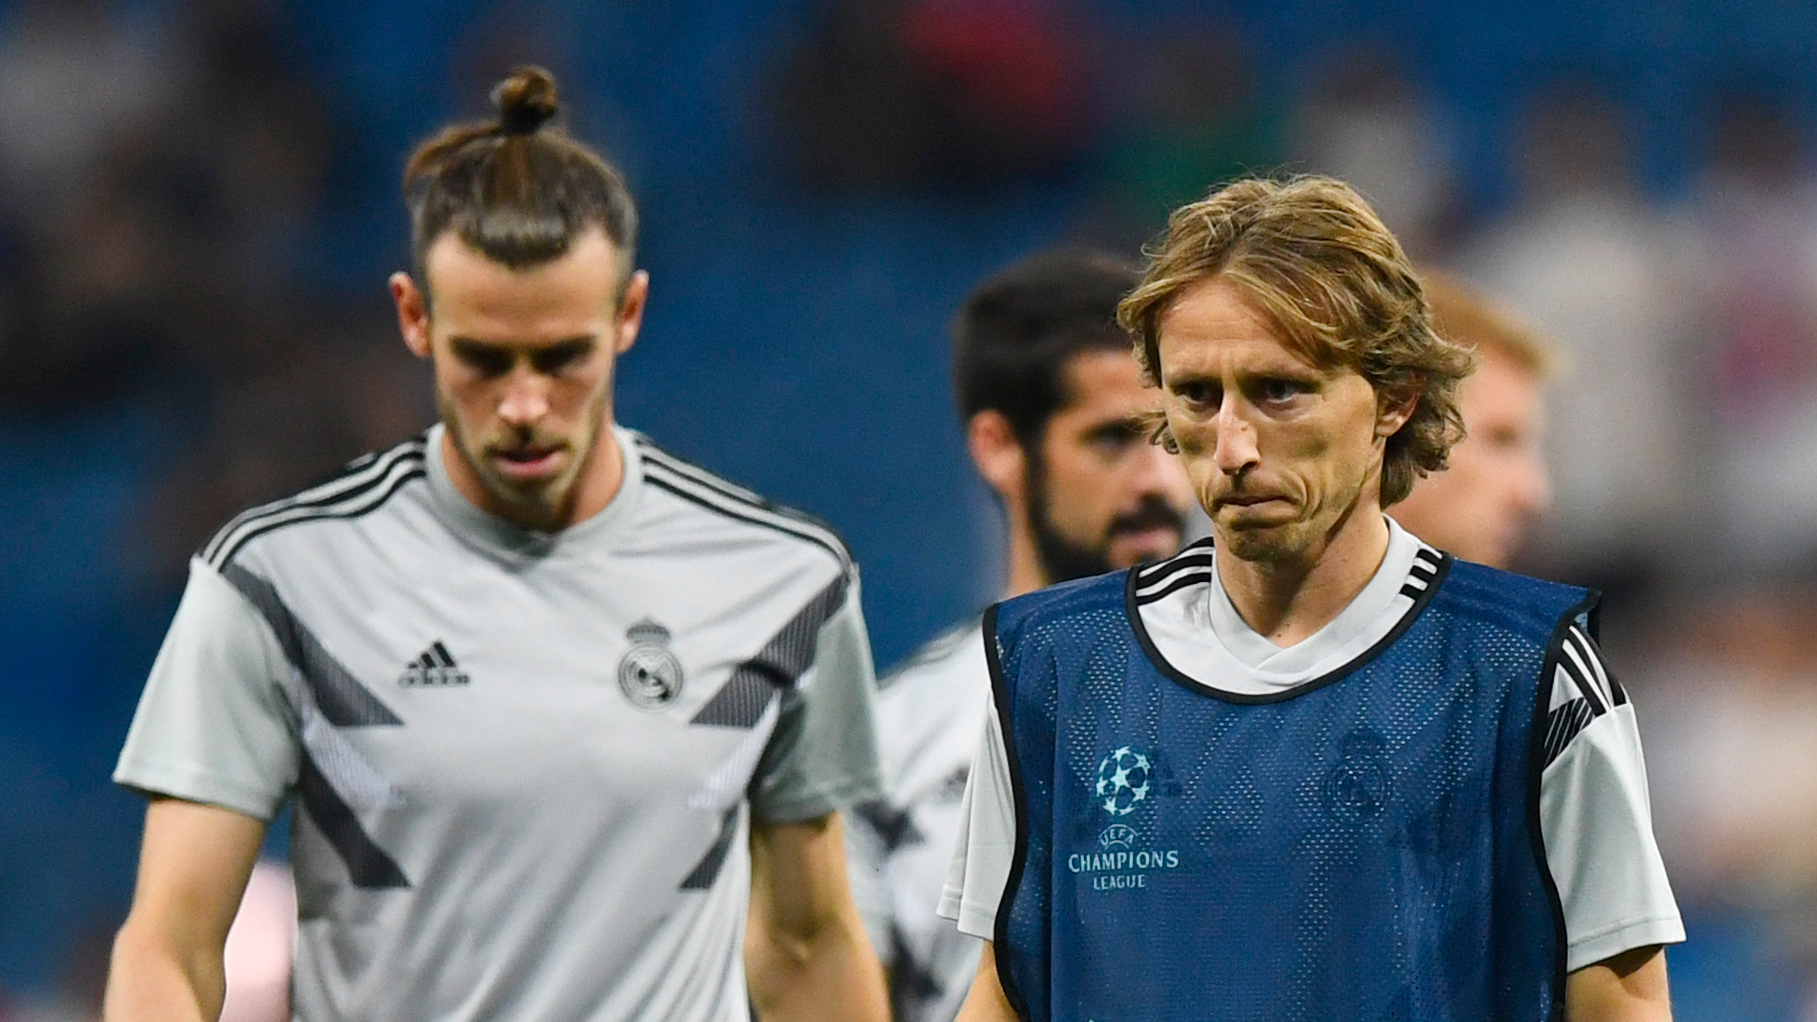 'Bale speaks Spanish, he's just shy' - Modric defends 'spectacular' ex-Real Madrid team-mate